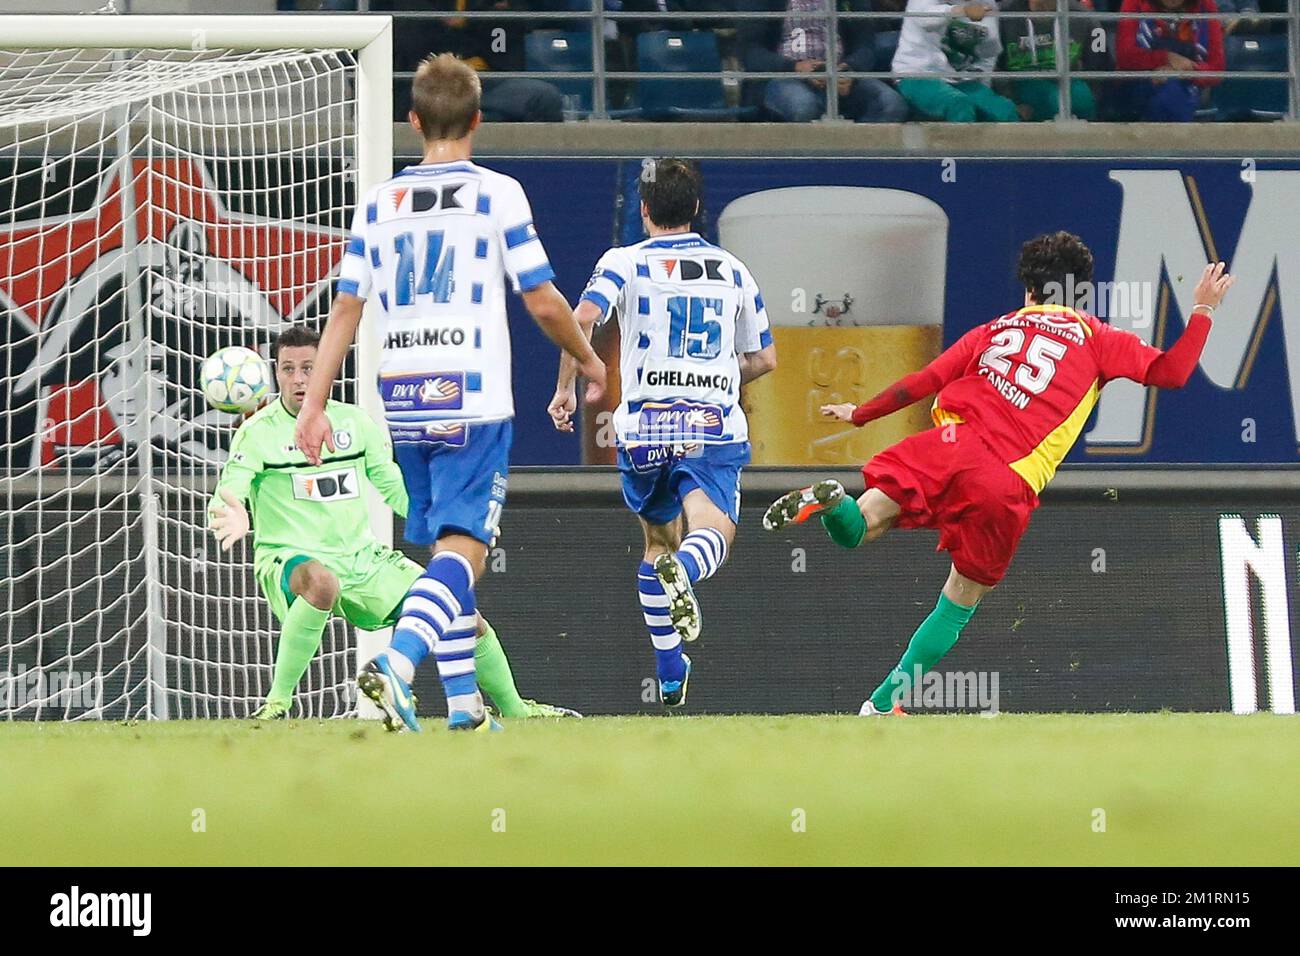 Oostende's Fernando Canesin scores a goal during the Jupiler Pro League match between KAA Gent and KV Oostende, in Gent, Saturday 21 September 2013, on day 8 of the Belgian soccer championship. BELGA PHOTO BRUNO FAHY Stock Photo